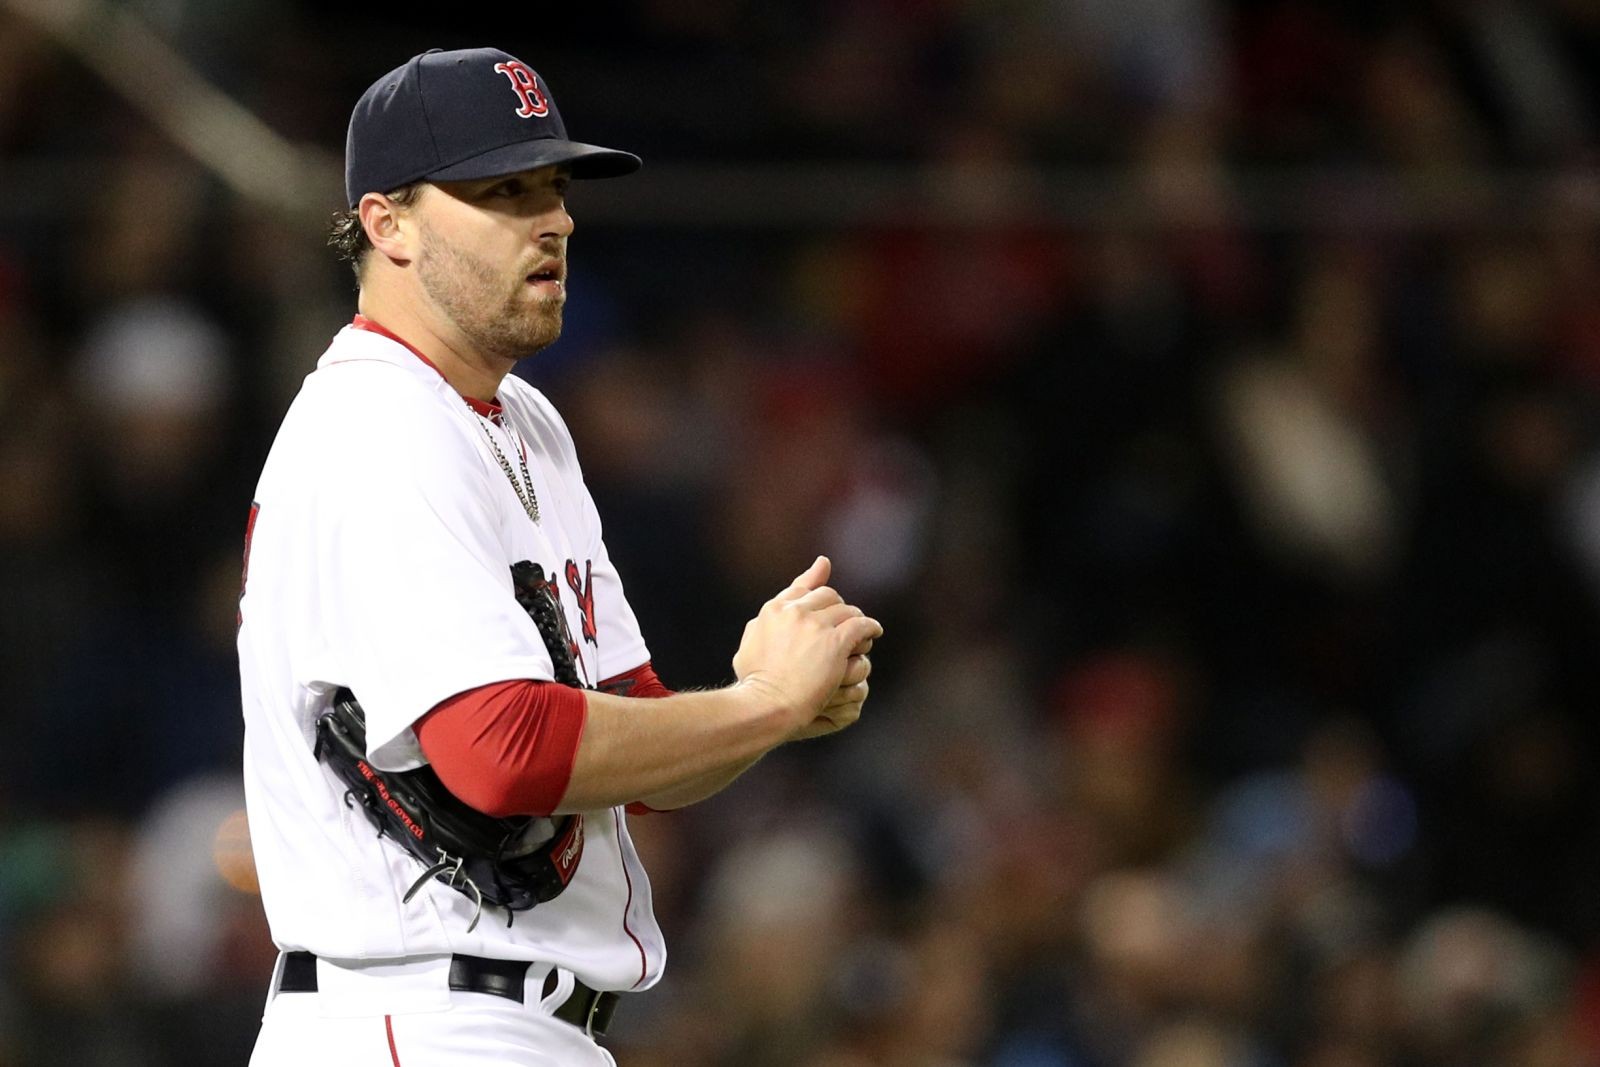 Boston Red Sox Report Cards RightHanded Pitcher Heath Hembree